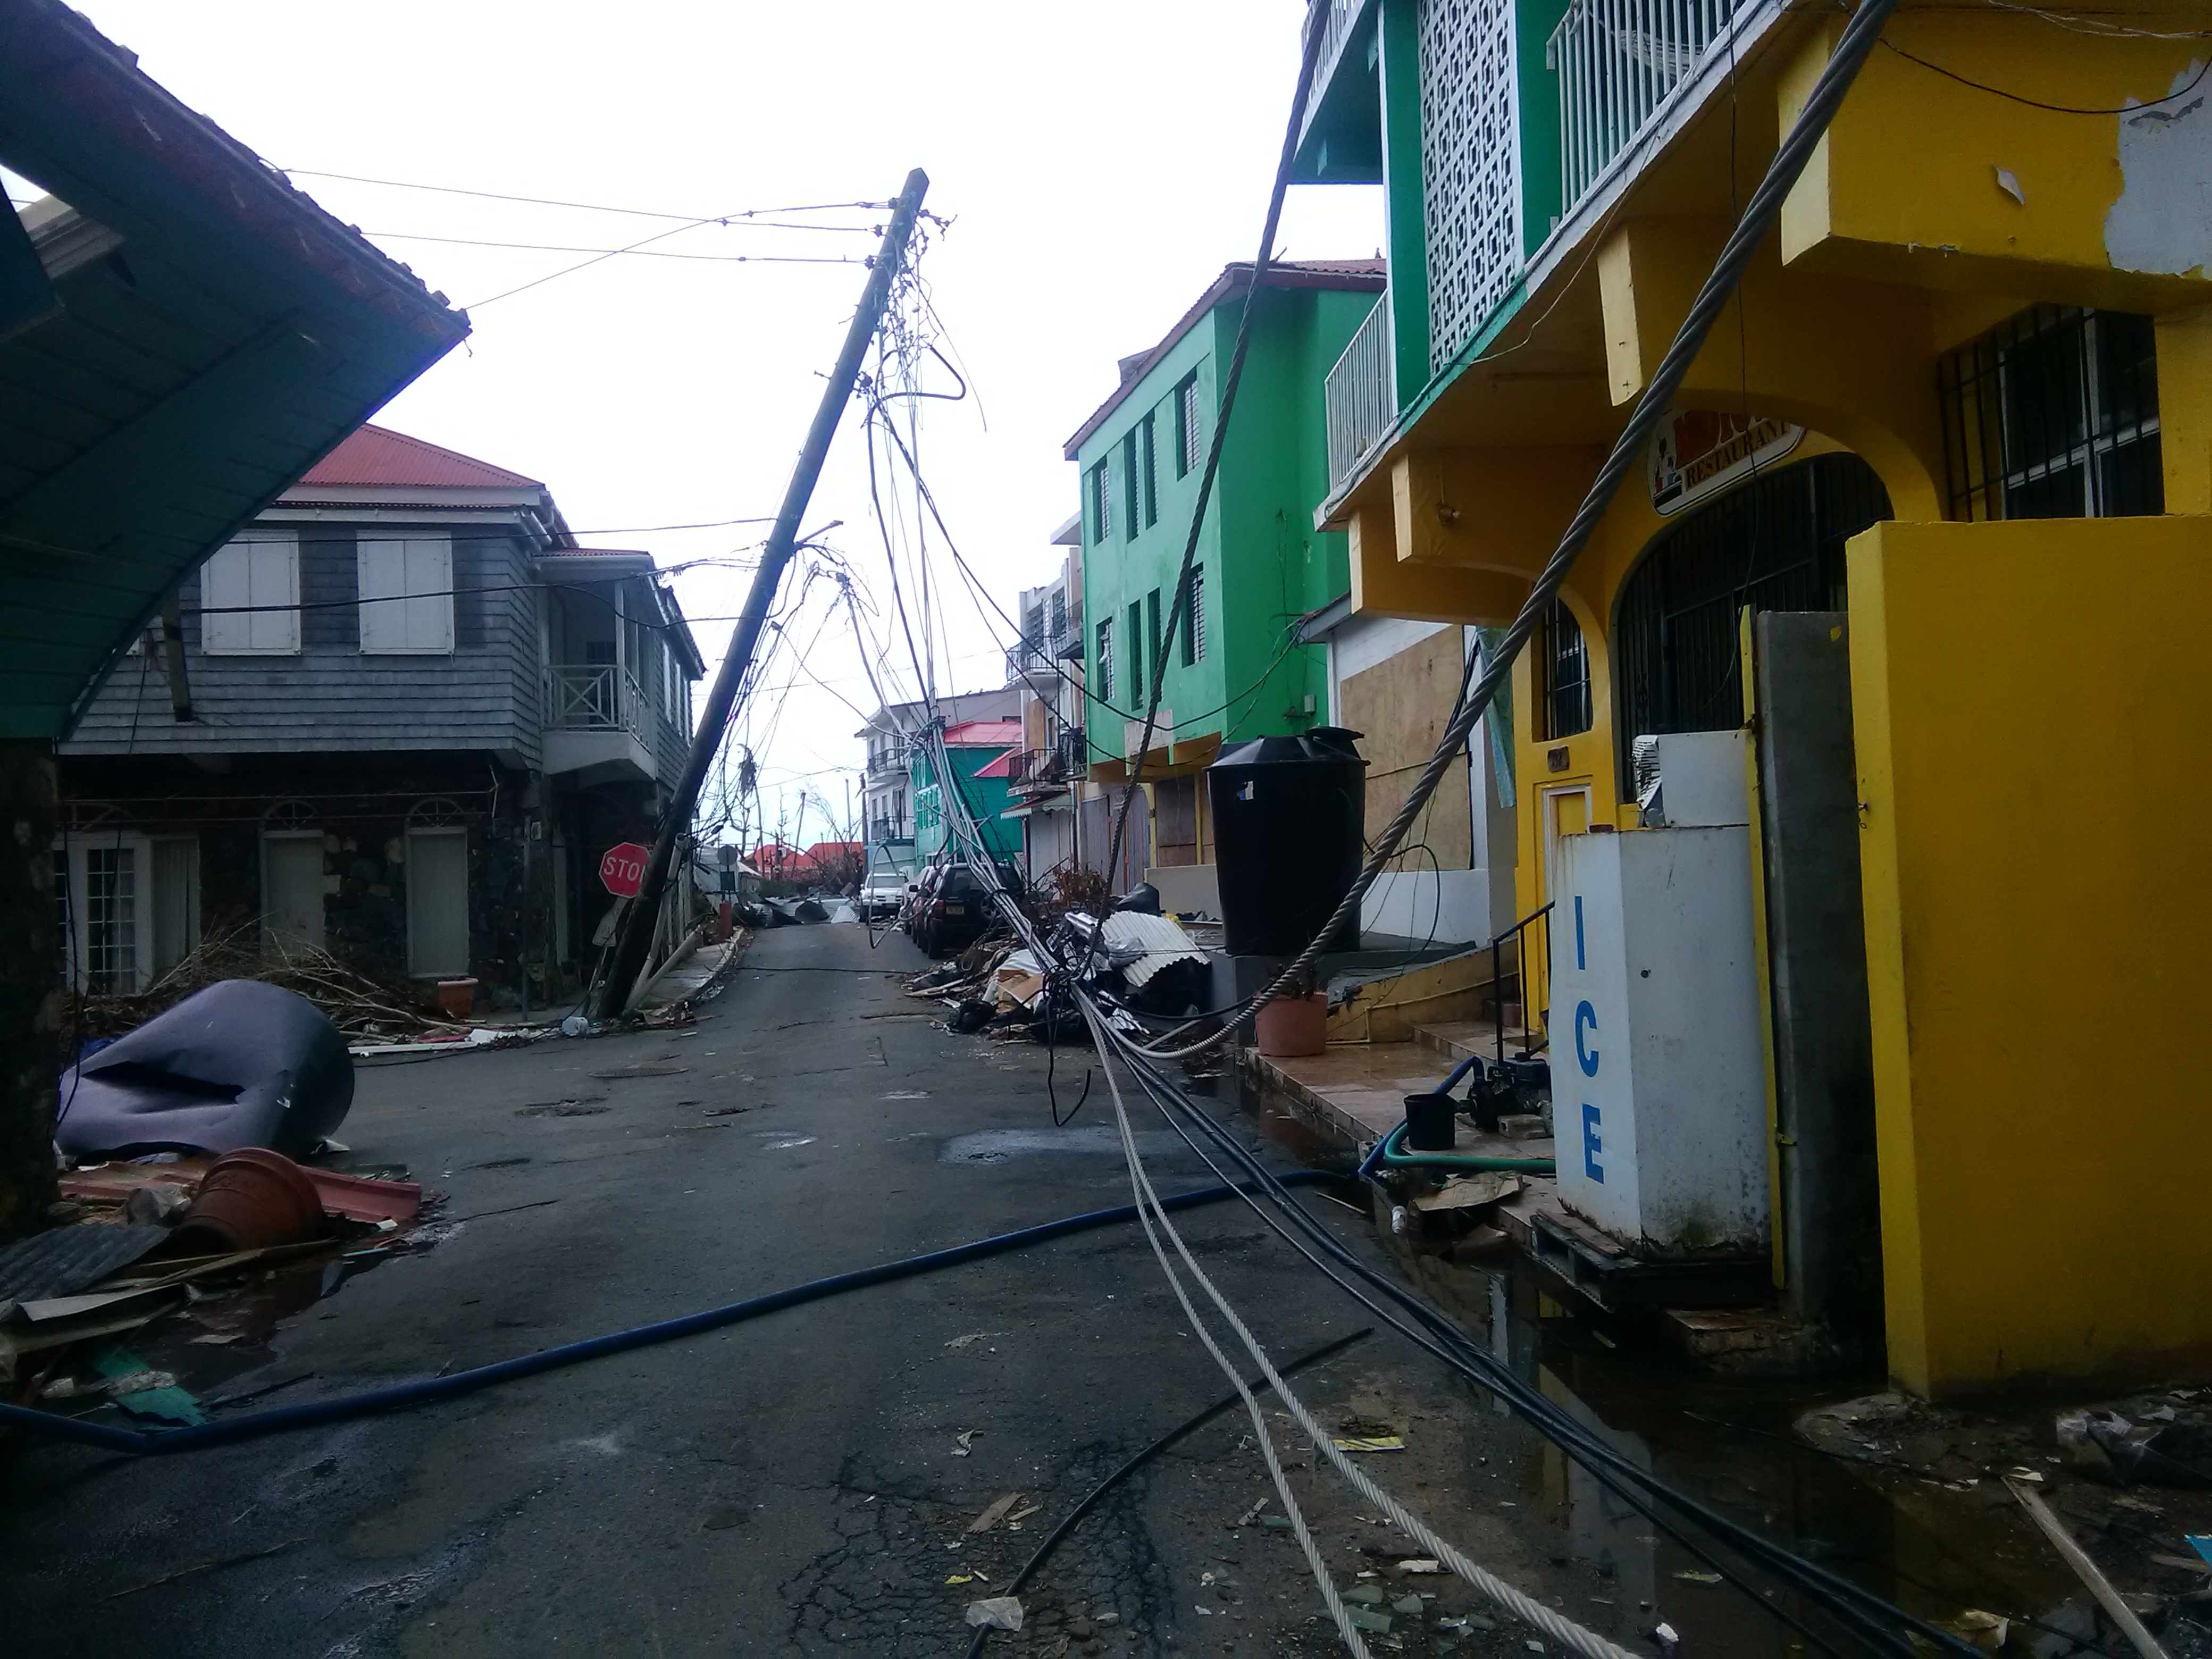 Roughly $50M to rebuild electricity grid – Vanterpool